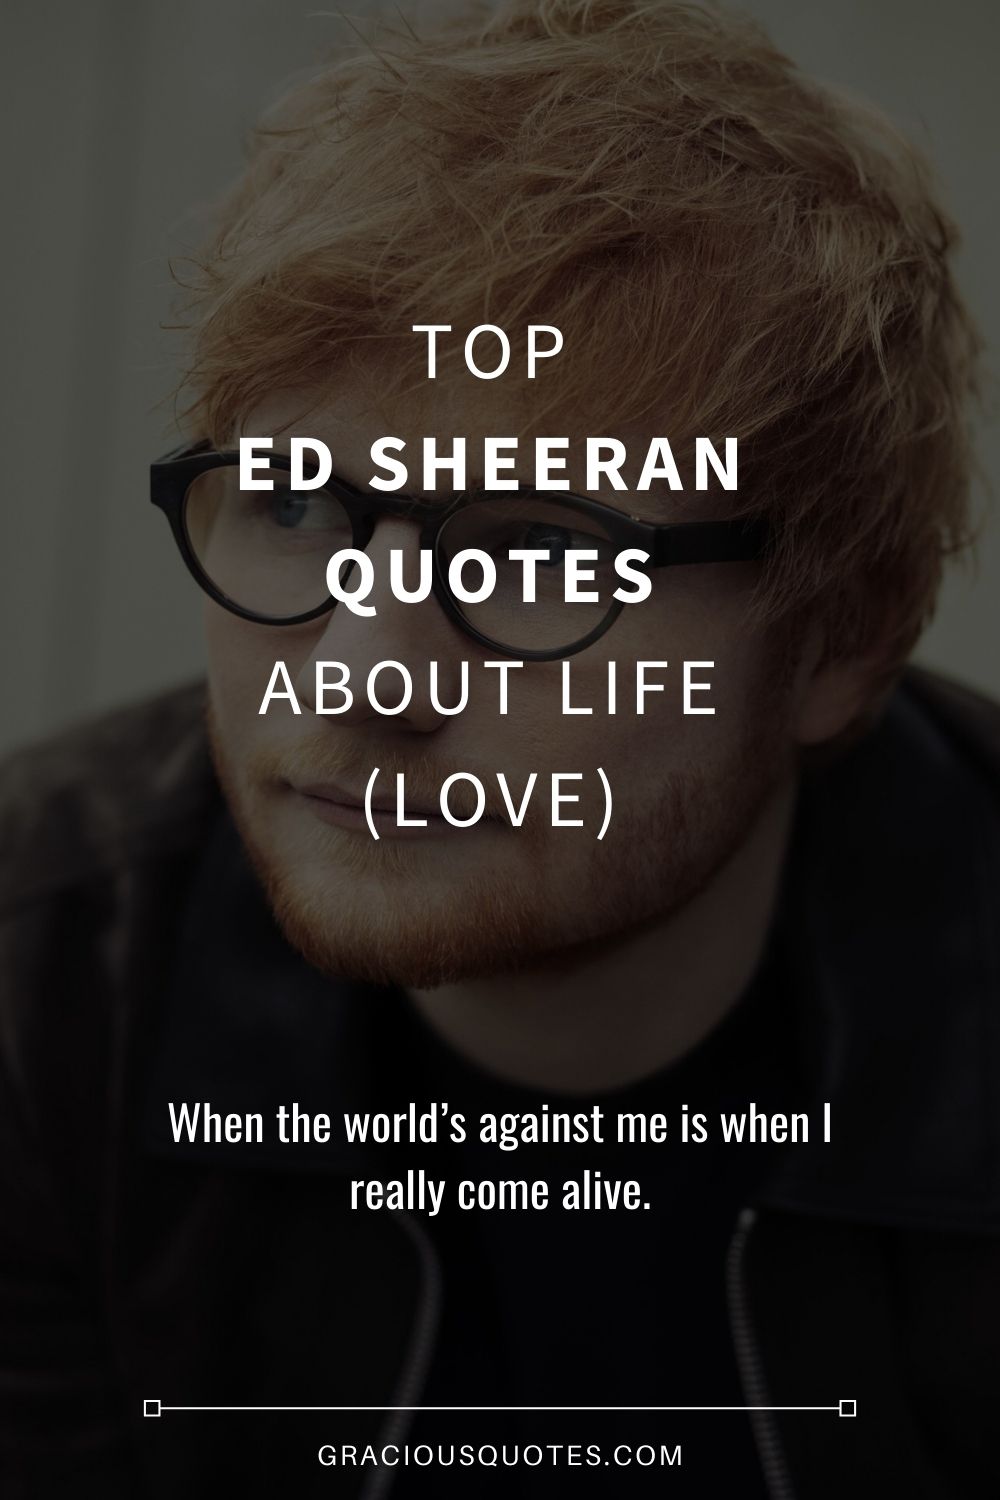 Top Ed Sheeran Quotes About Life (LOVE) - Gracious Quotes